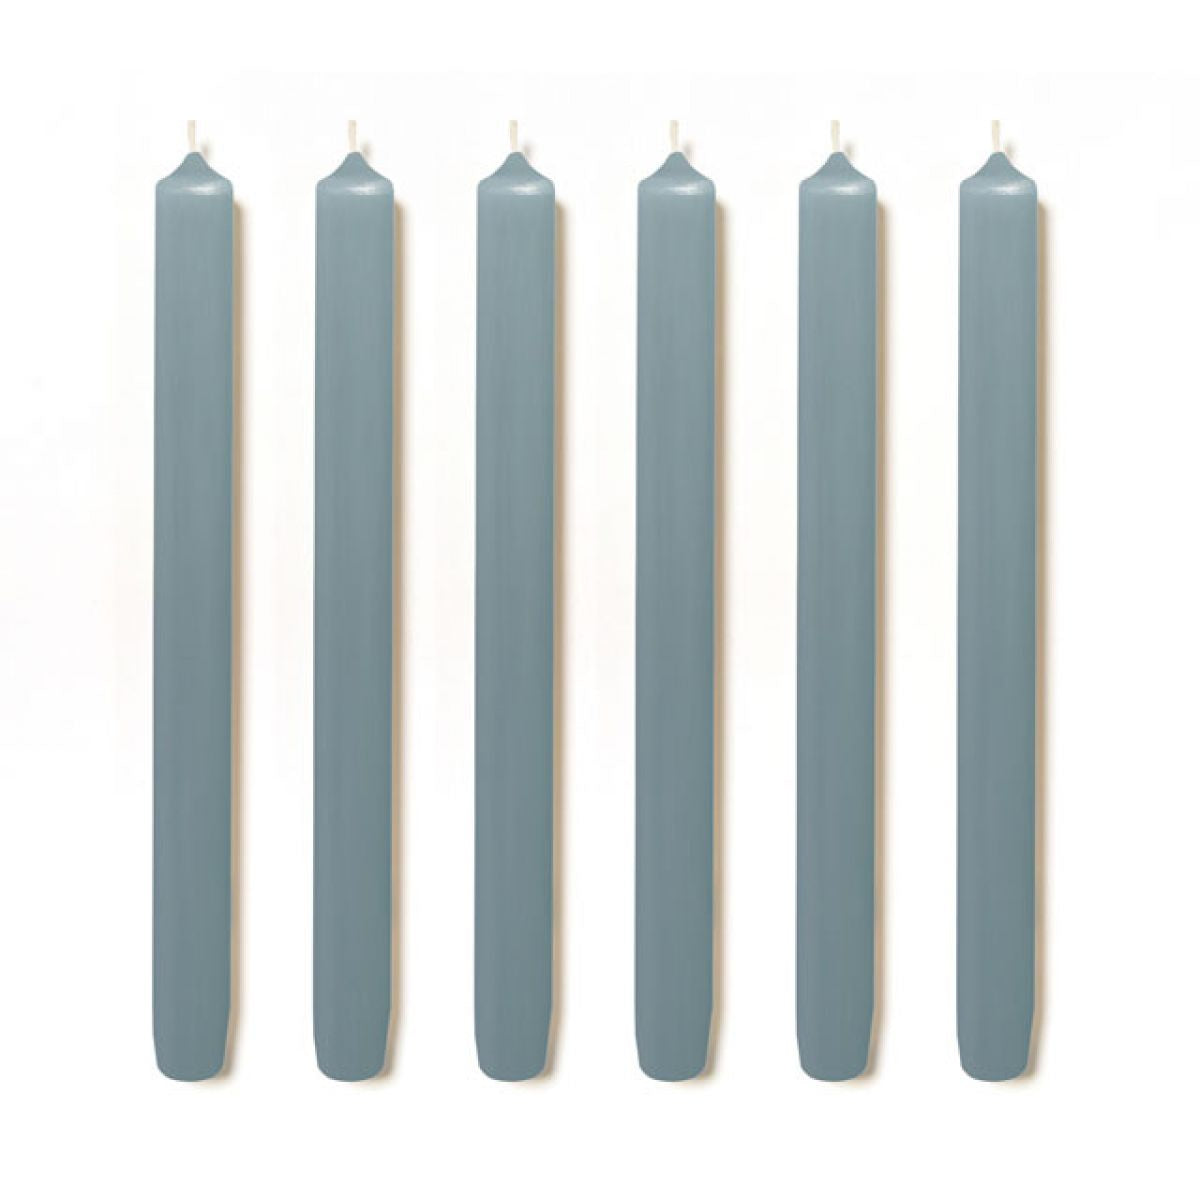 Cire Trudon Bougies Royales 6 Taper Candles Grey